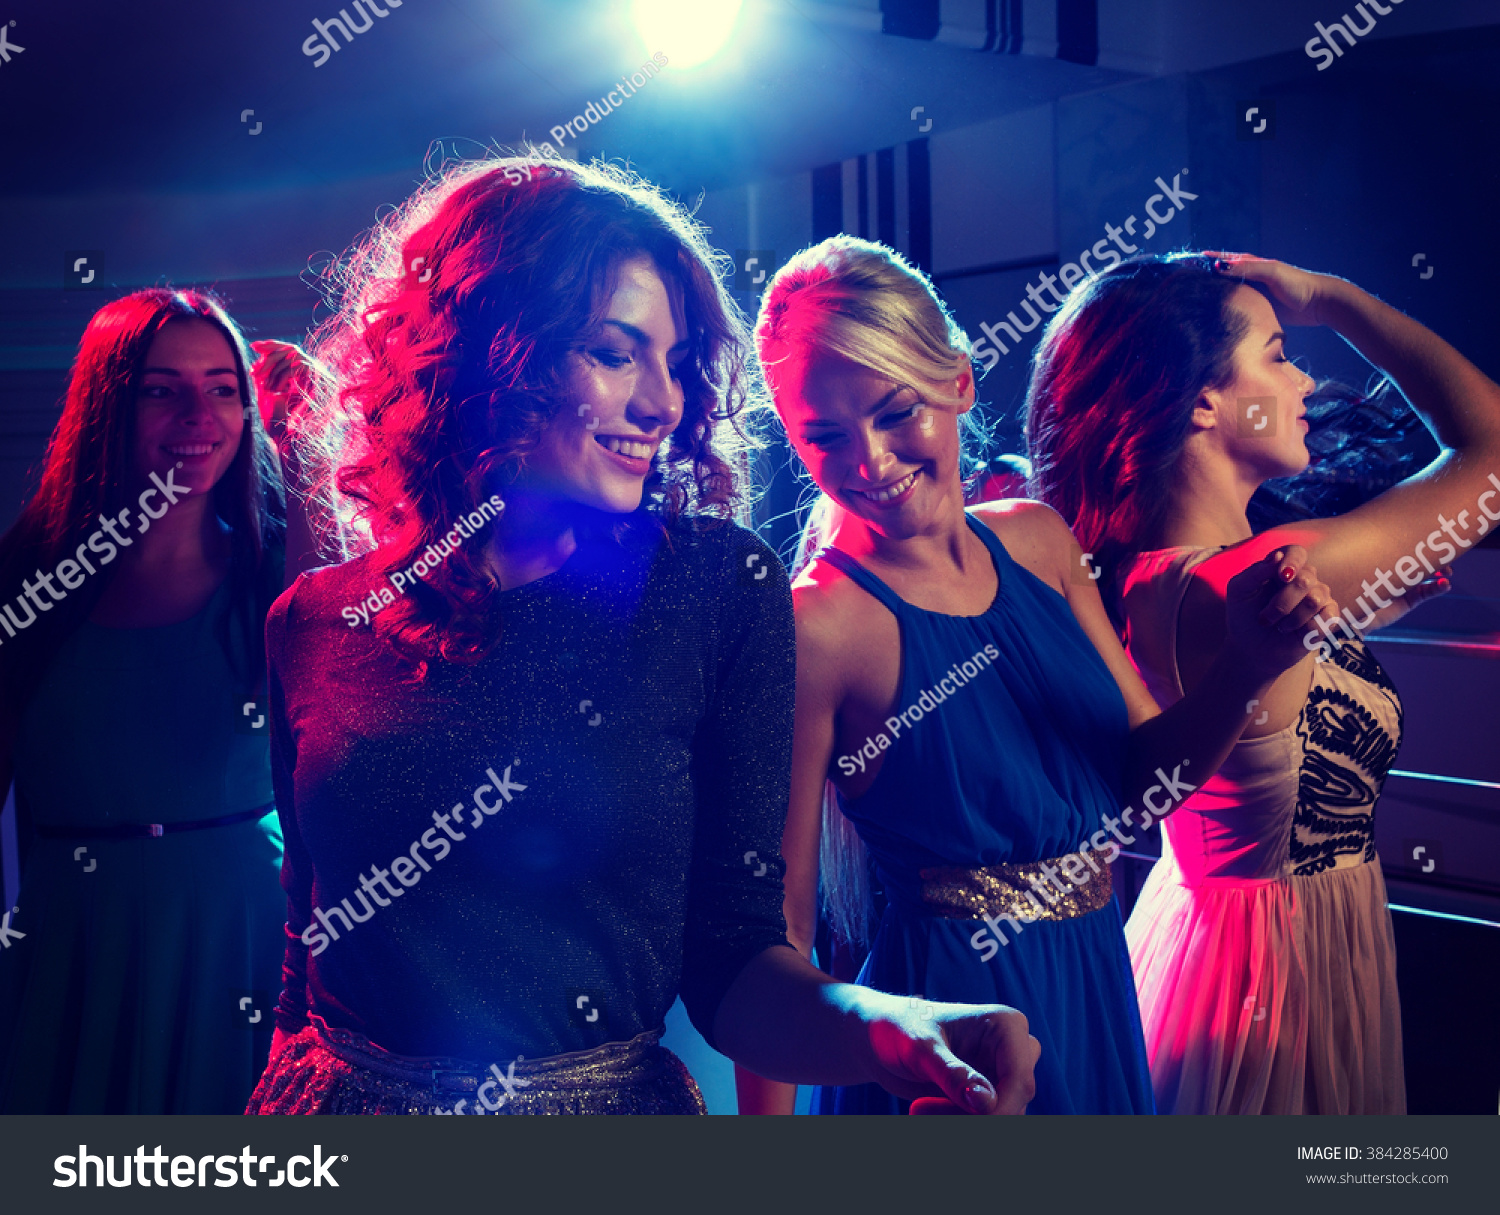 Party Holidays Celebration Nightlife People Concept Stock Photo ...